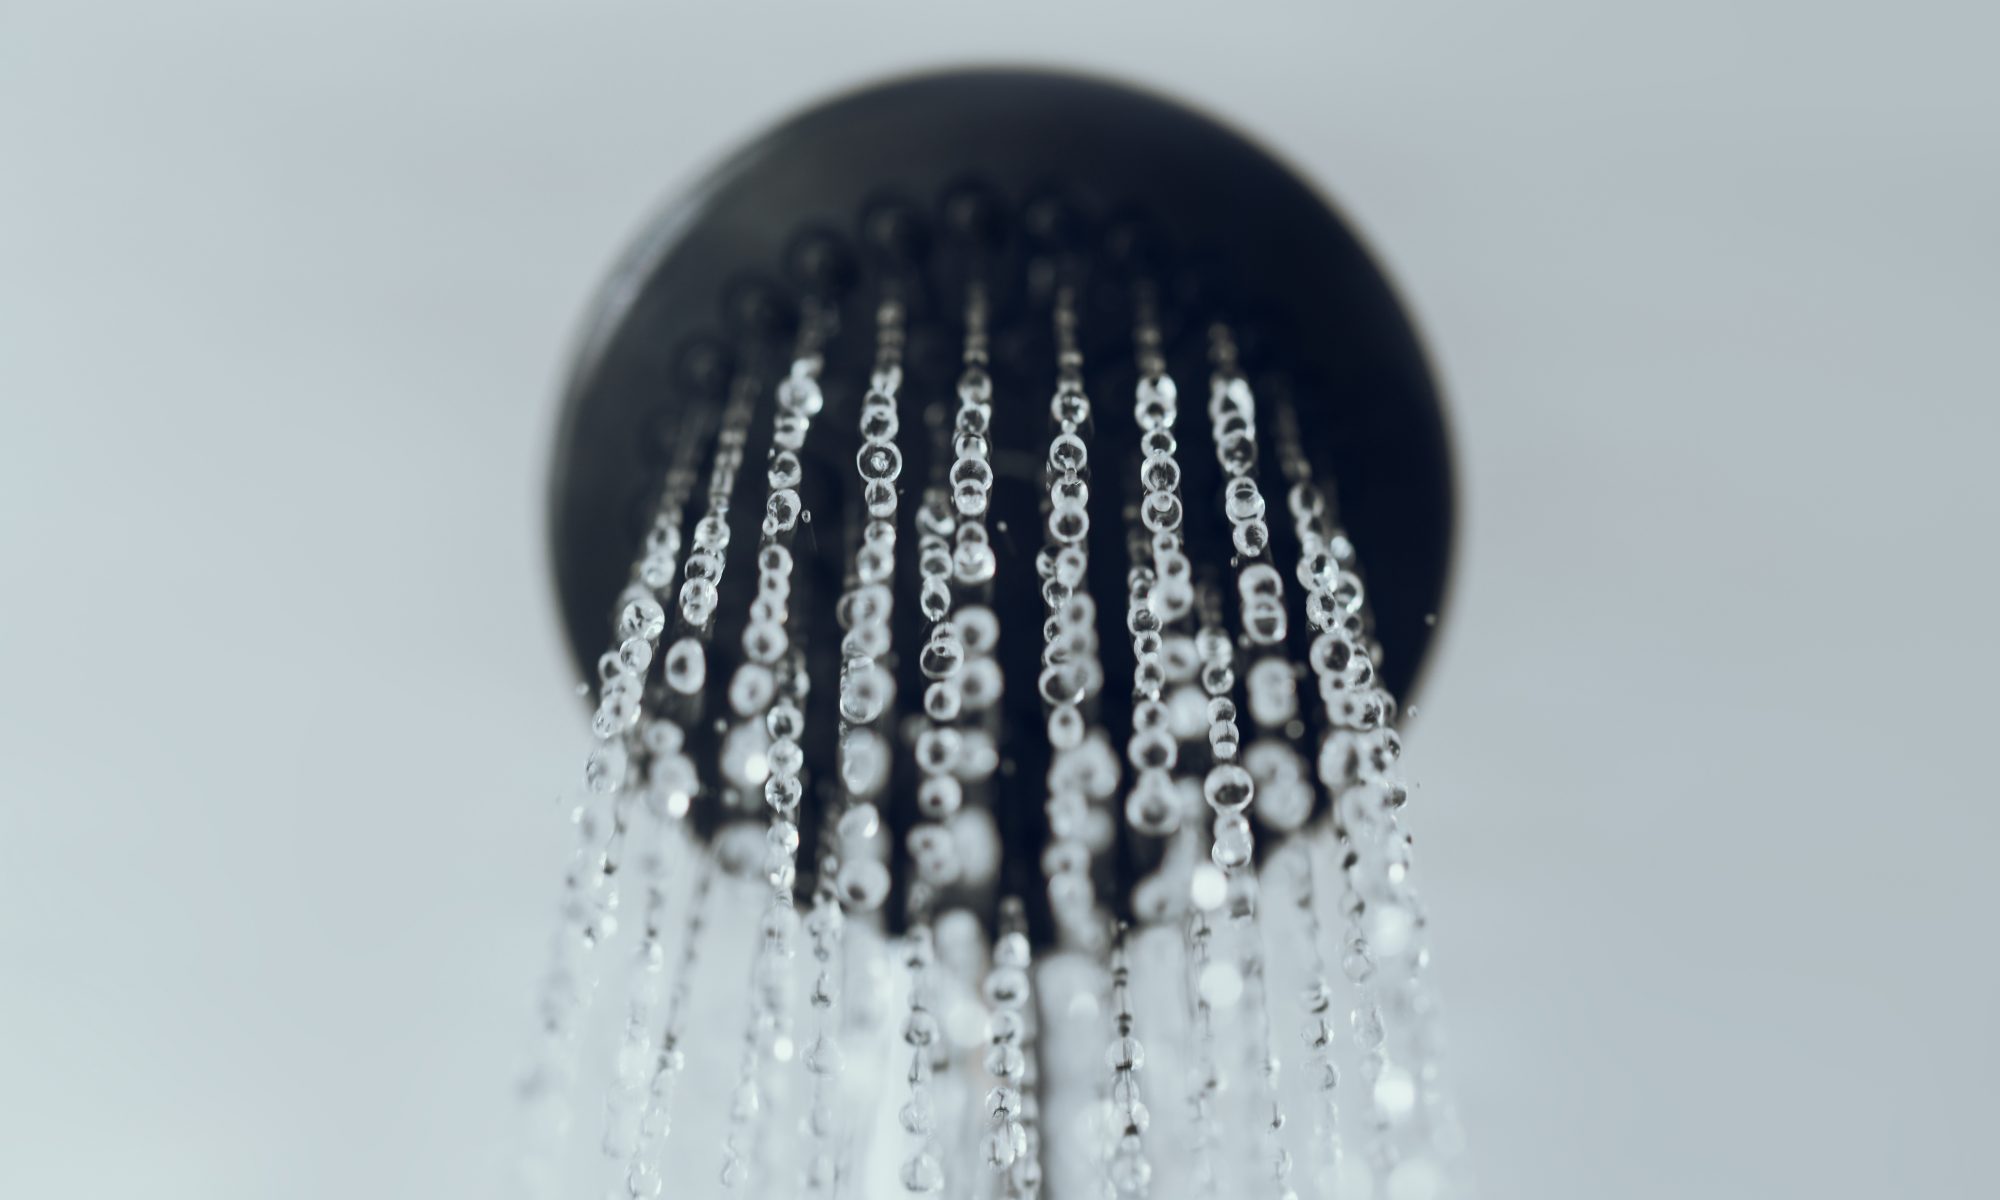 Water coming out of a shower head - camera angle looking up from below